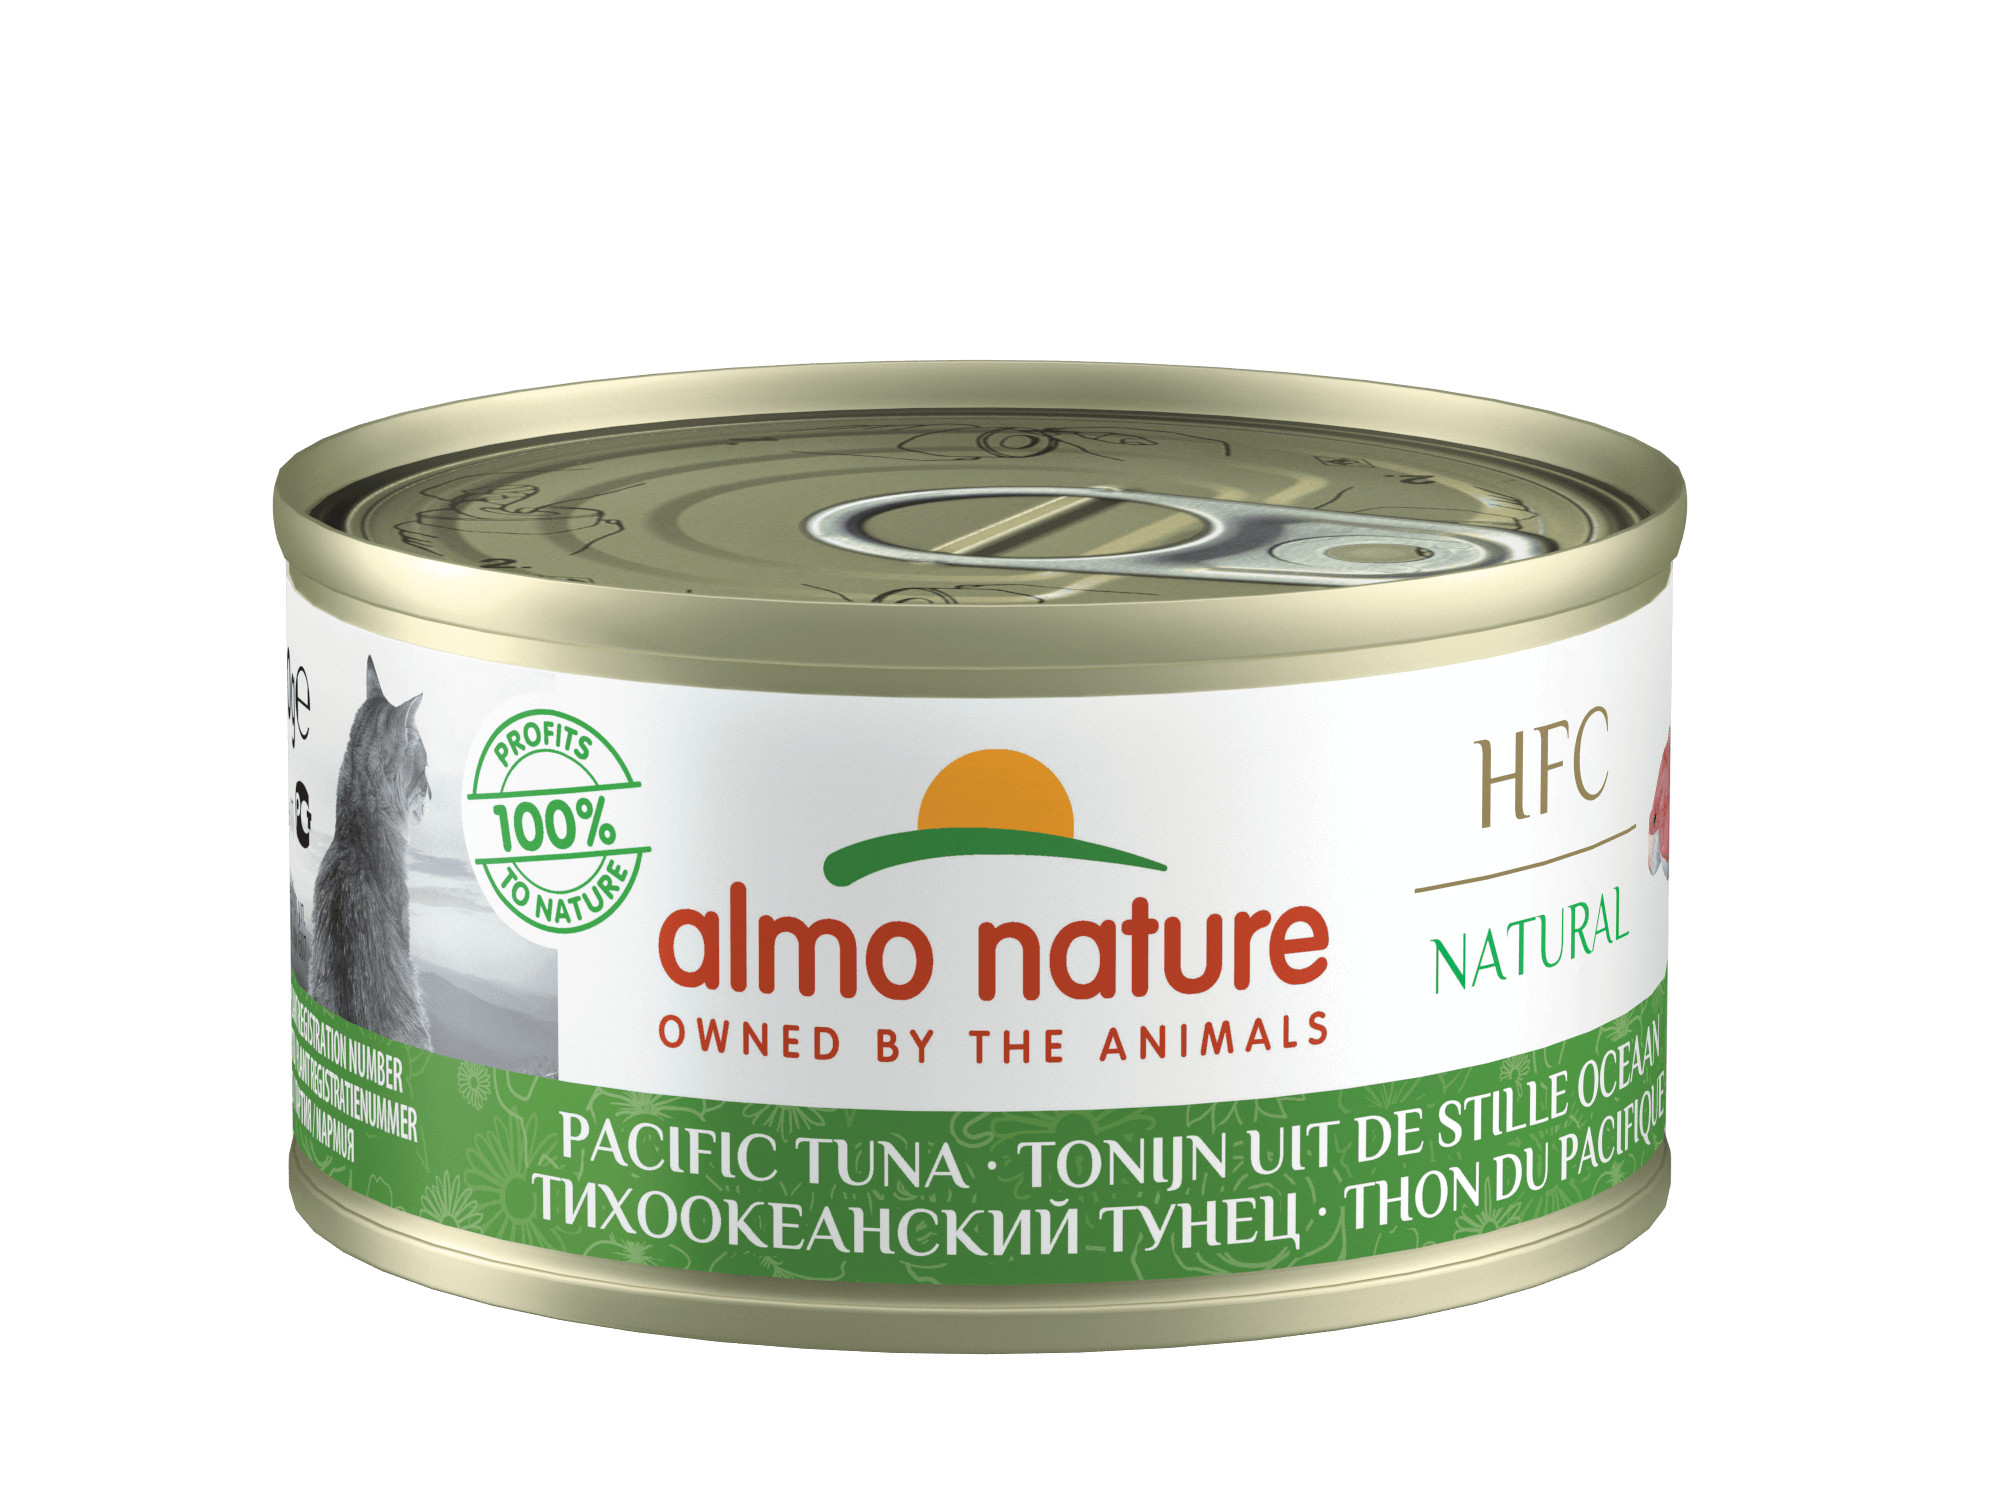 Almo Nature HFC Natural tun fra Stillehavet (Pacific)